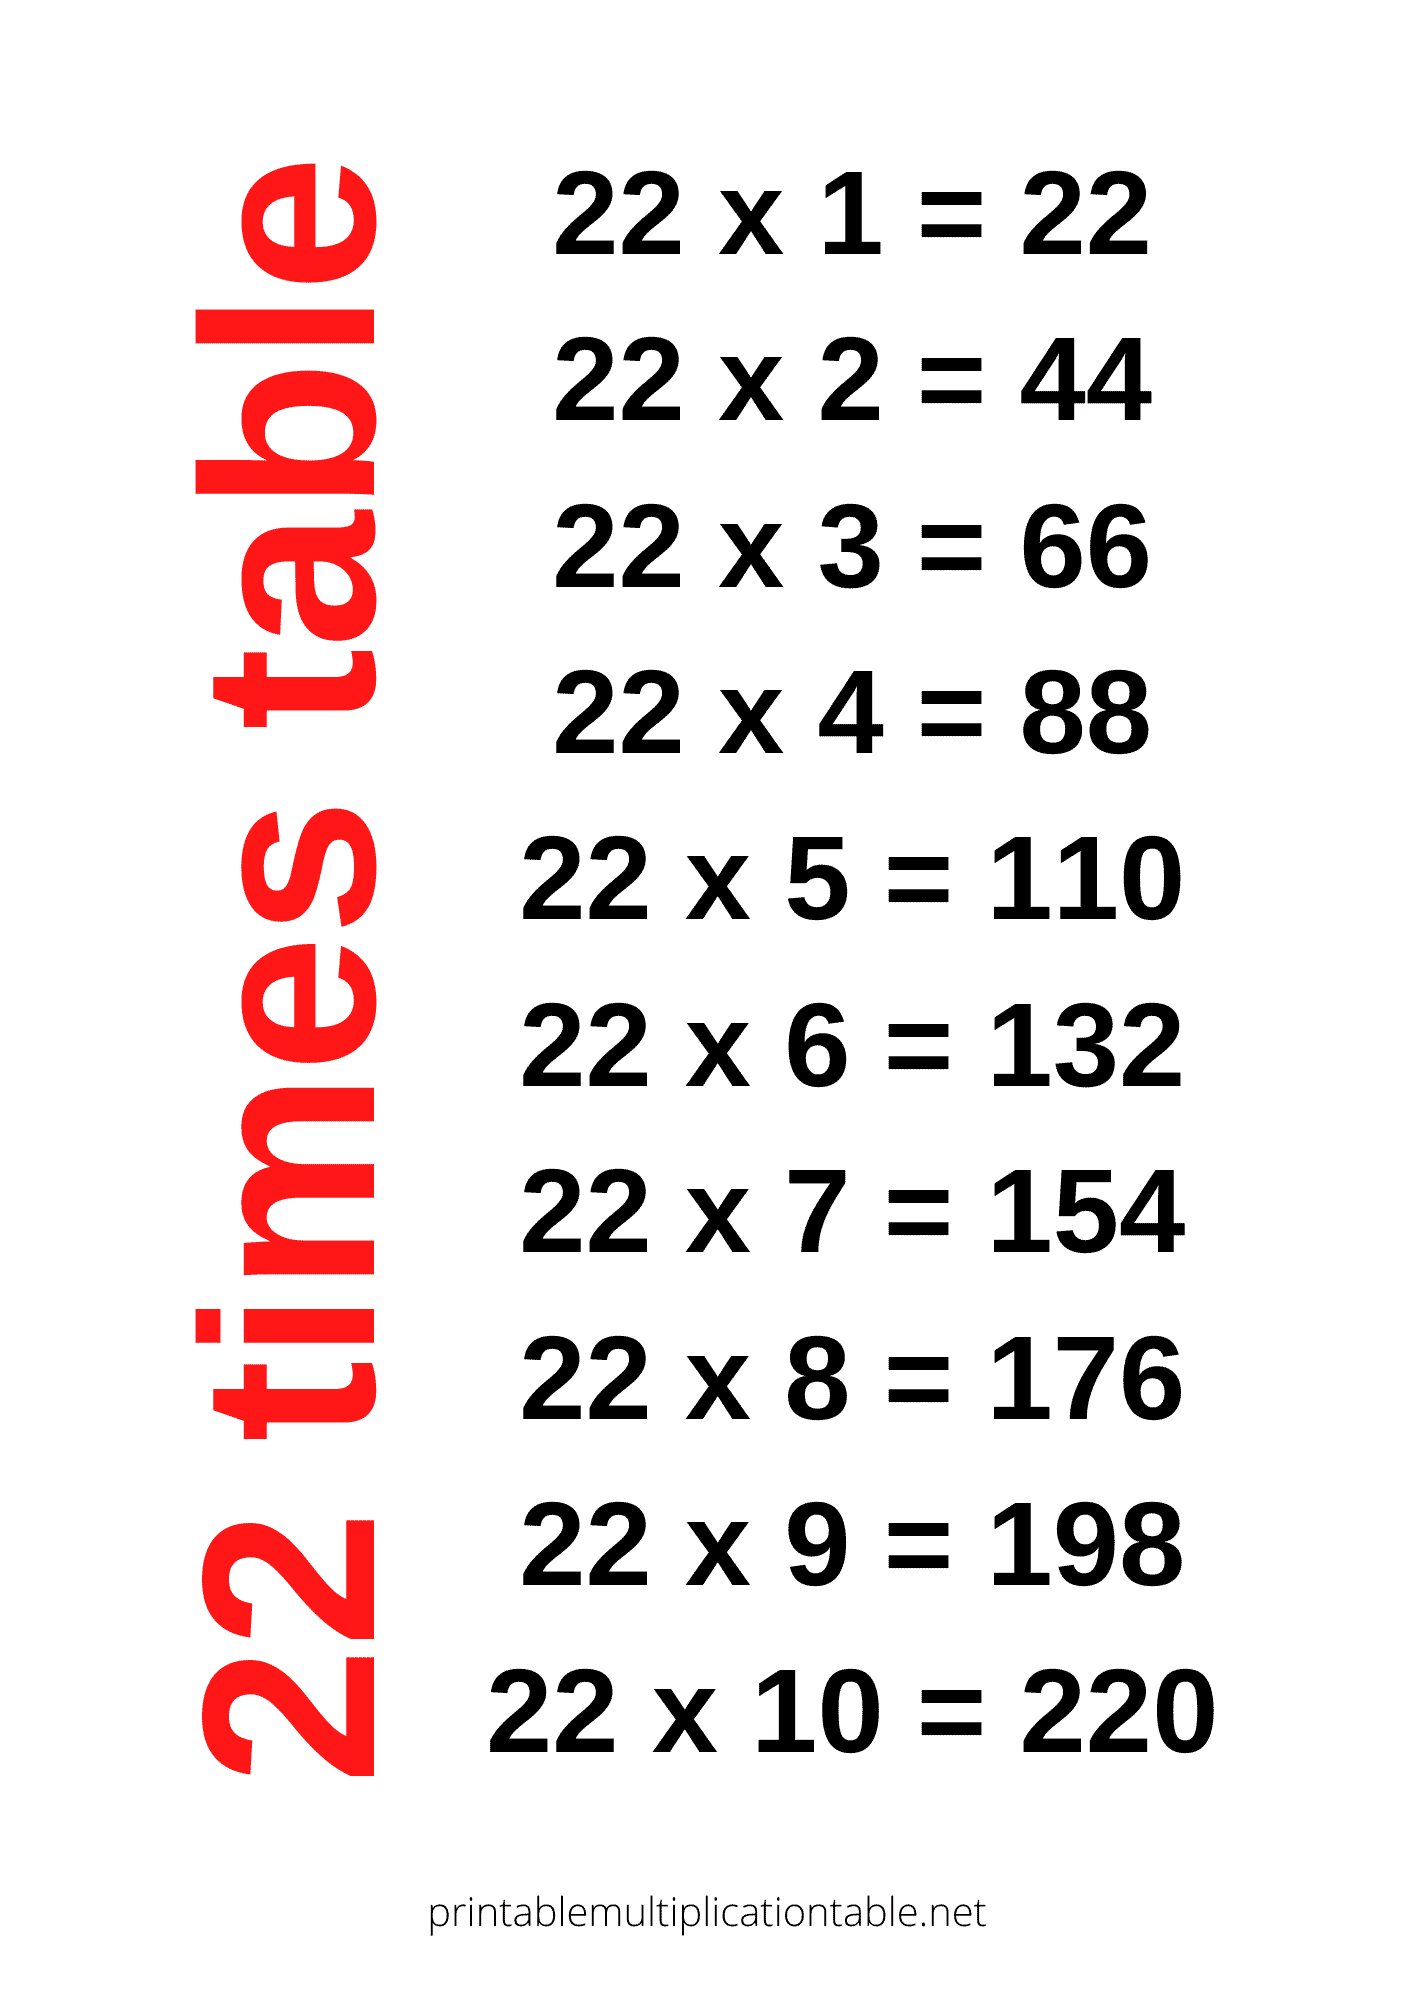 22 times table chart